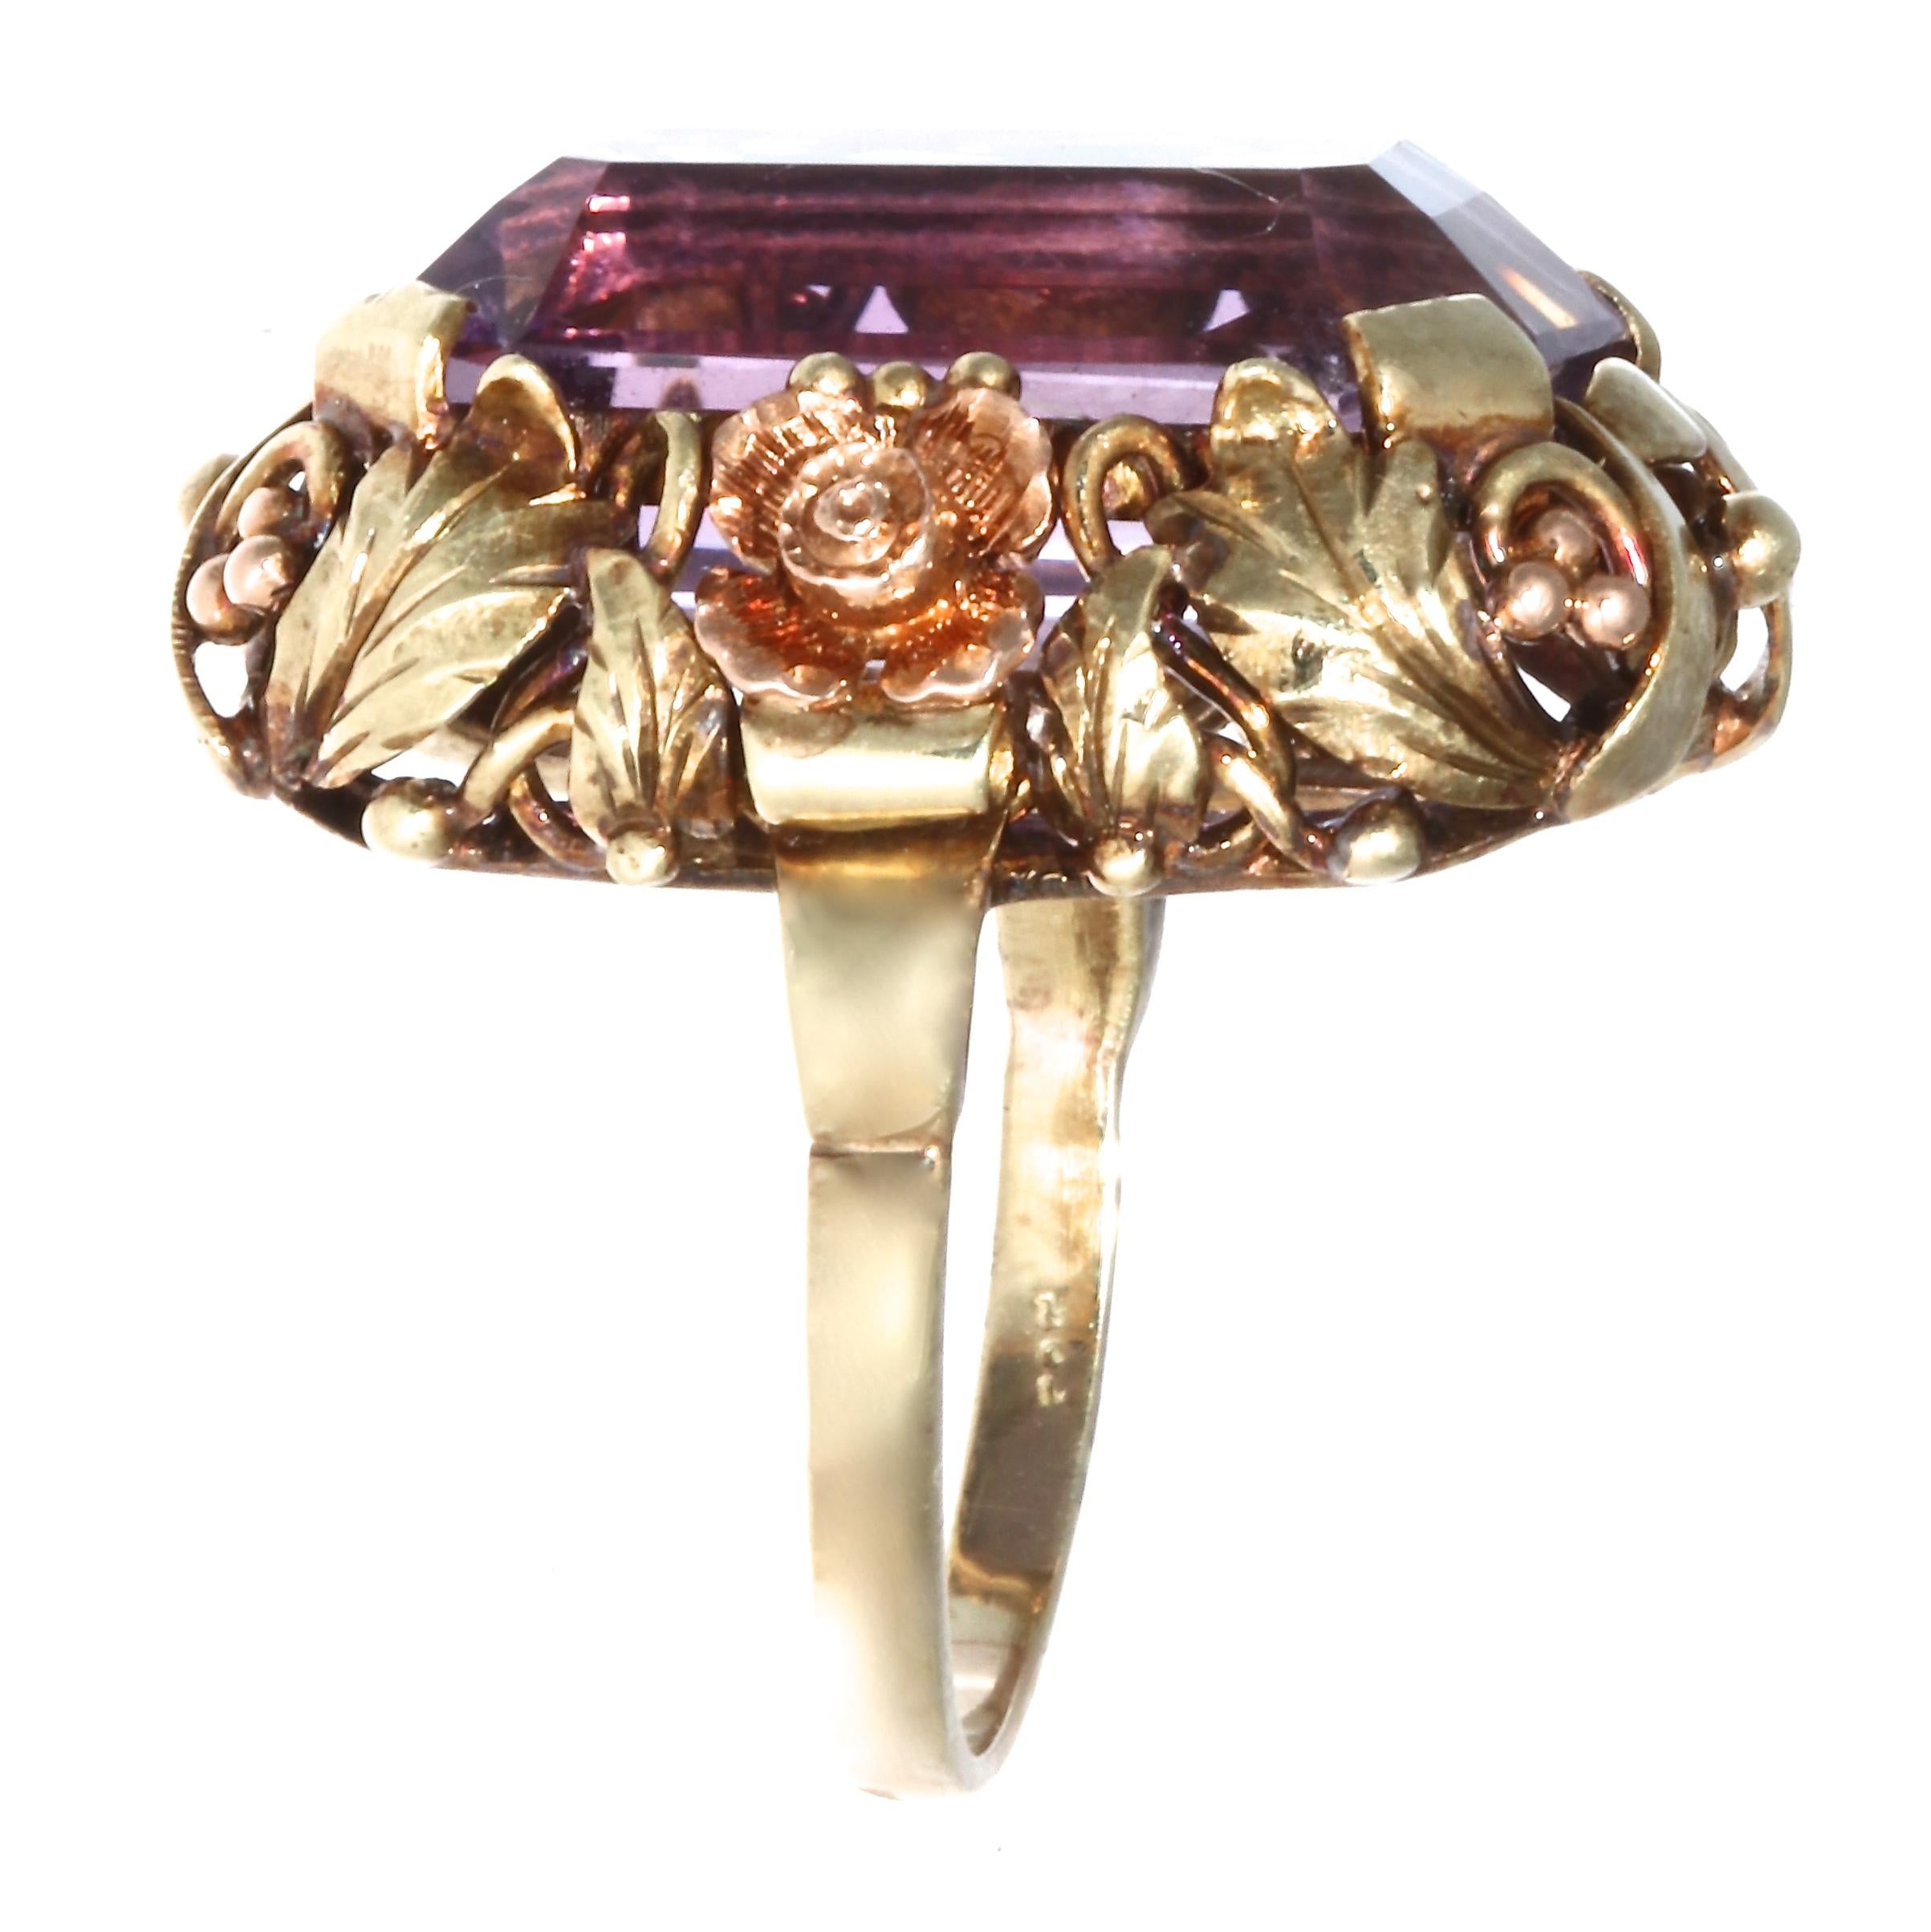 If you're a fan of the Victorian period this is a ring for you, it exemplifies the lace and frills of the era. The richly colored amethyst weighs approximately 14.75 carats created in 14k yellow and rose gold, size 7 and may easily be re-sized to